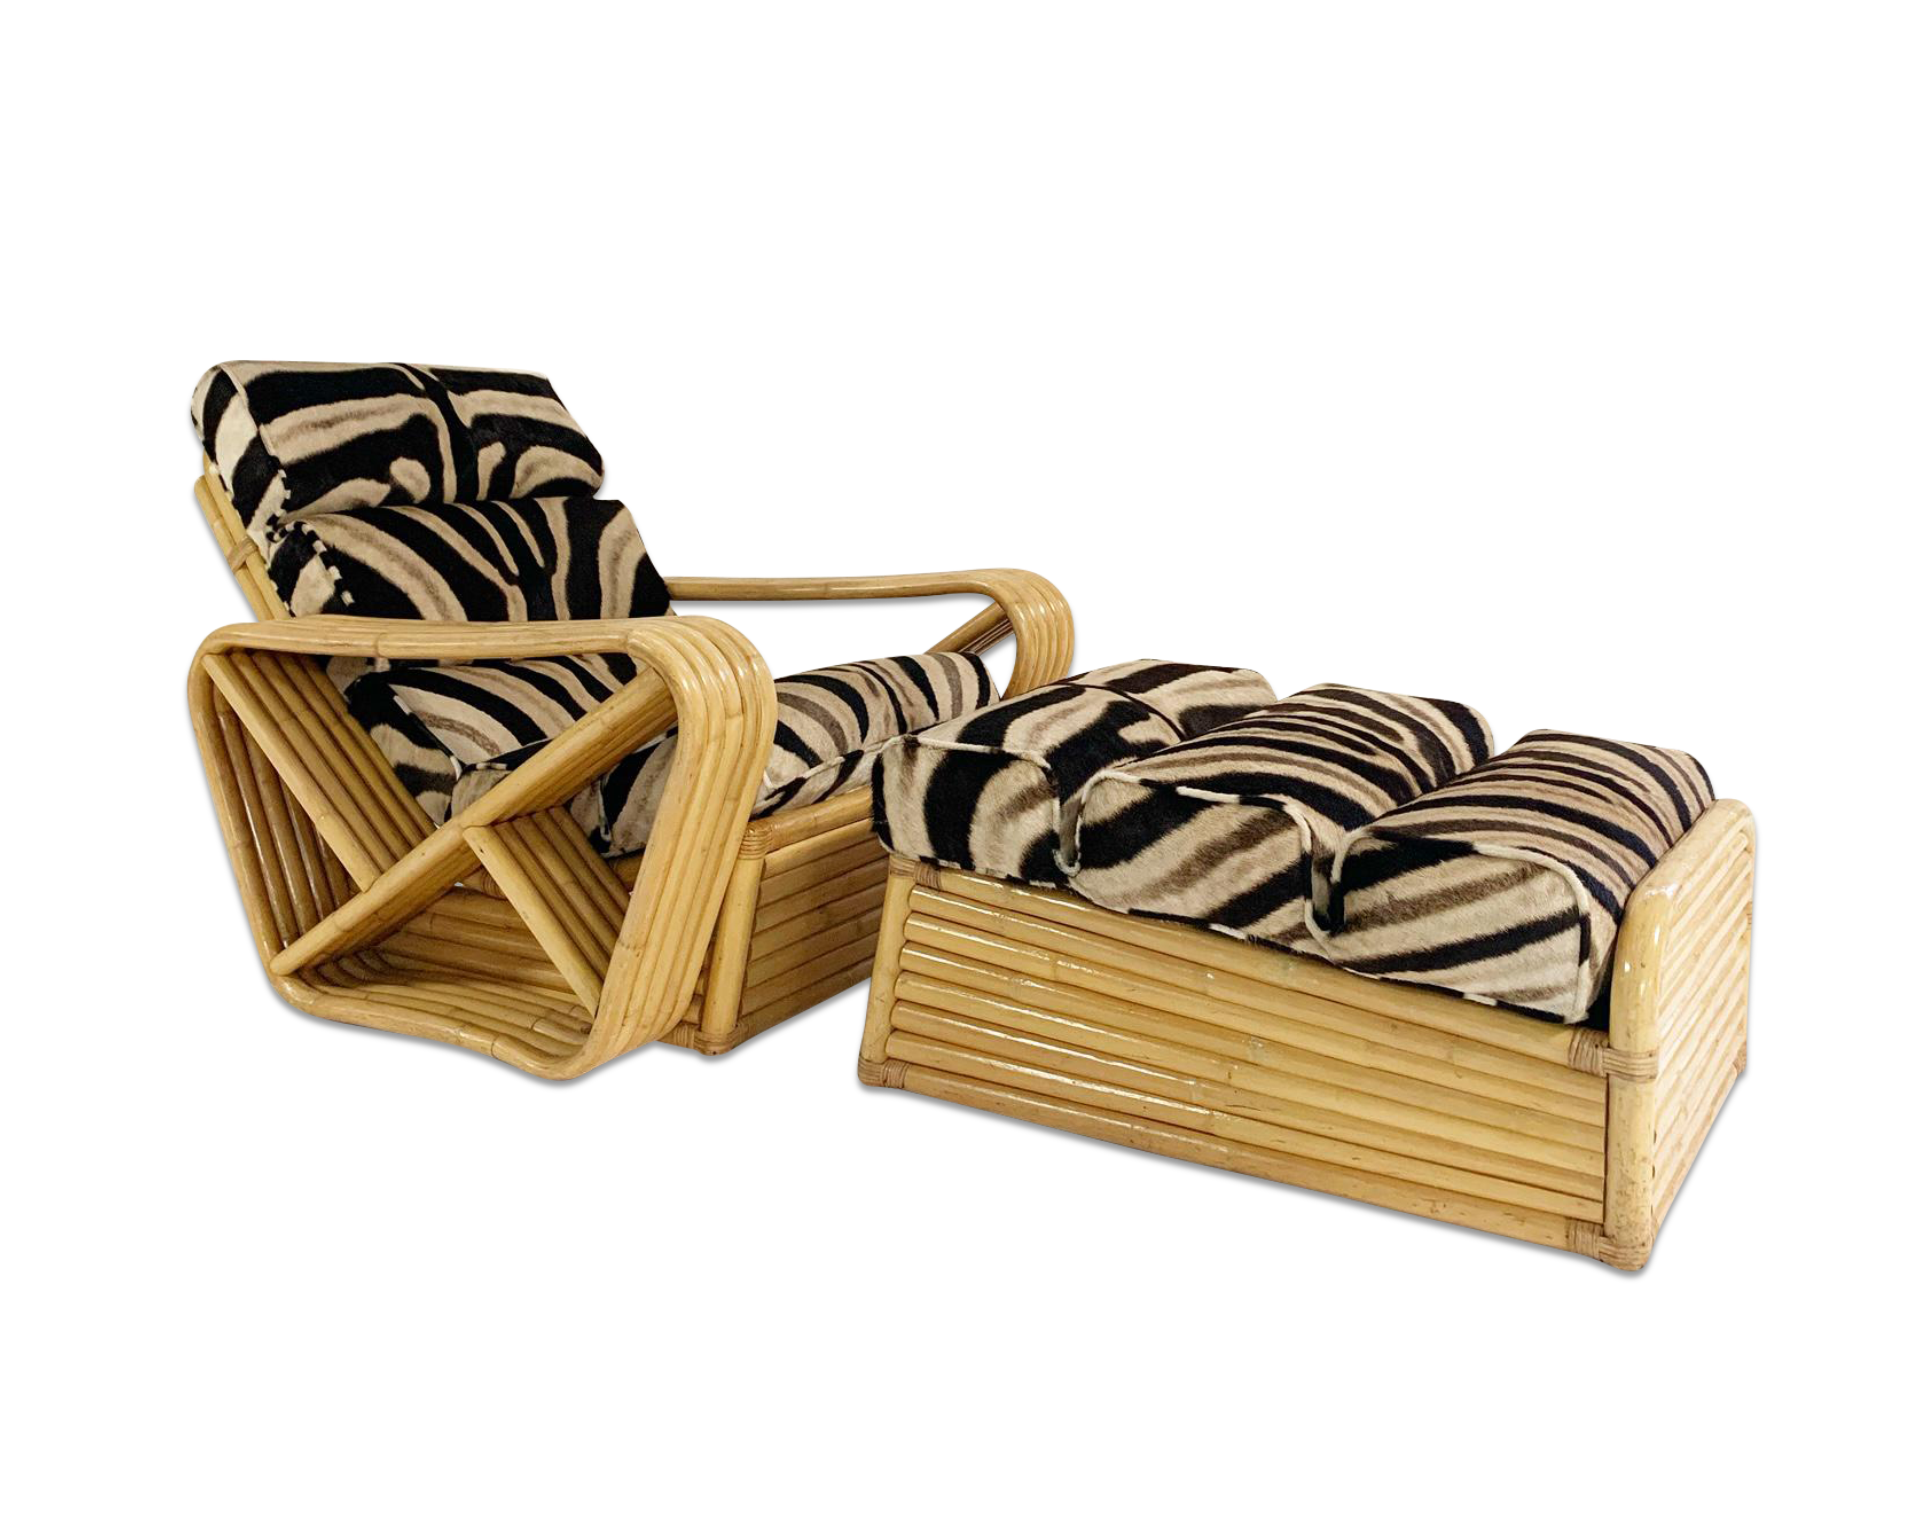 Rattan Lounge Chair and Ottoman in Zebra Hide - FORSYTH